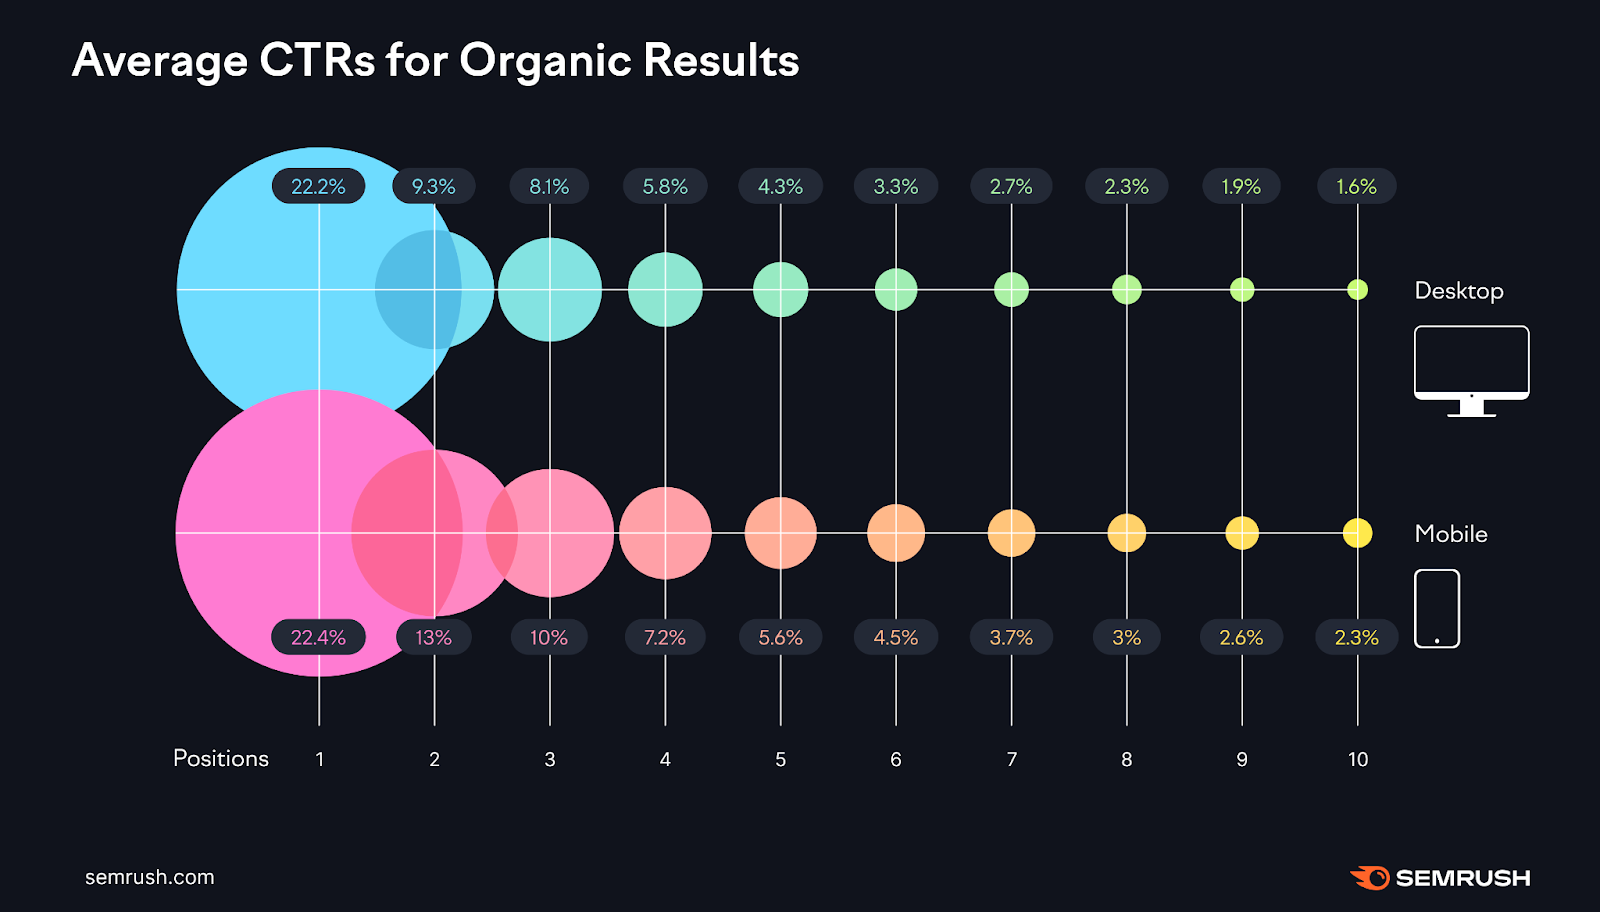 Semrush data showing average CTRs for organic results